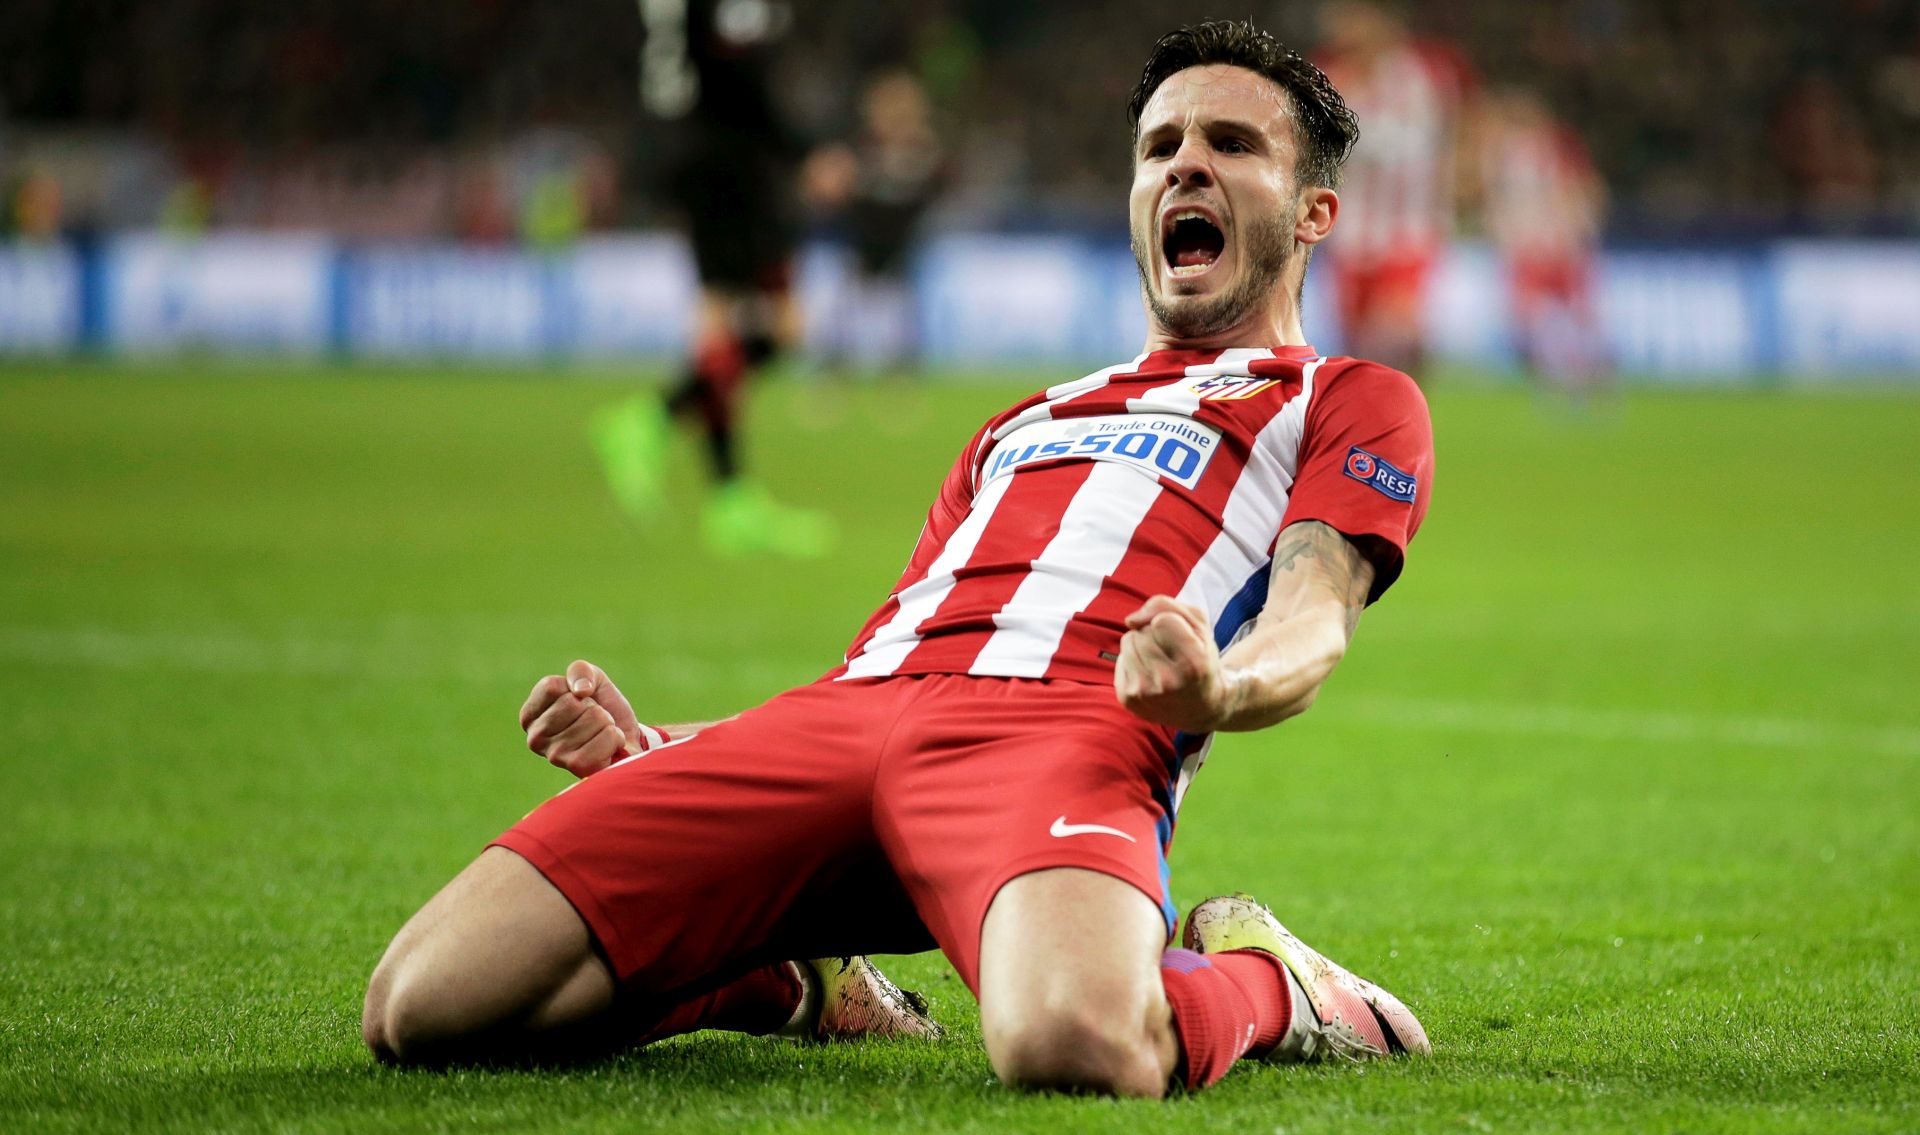 epa05807385 Atletico Madrid's Saul Niguez celebrates after scoring the 1-0 lead during the UEFA Champions League Round of 16, first leg soccer match between Bayer Leverkusen and Atletico Madrid in Leverkusen, Germany, 21 February 2017.  EPA/FRIEDEMANN VOGEL